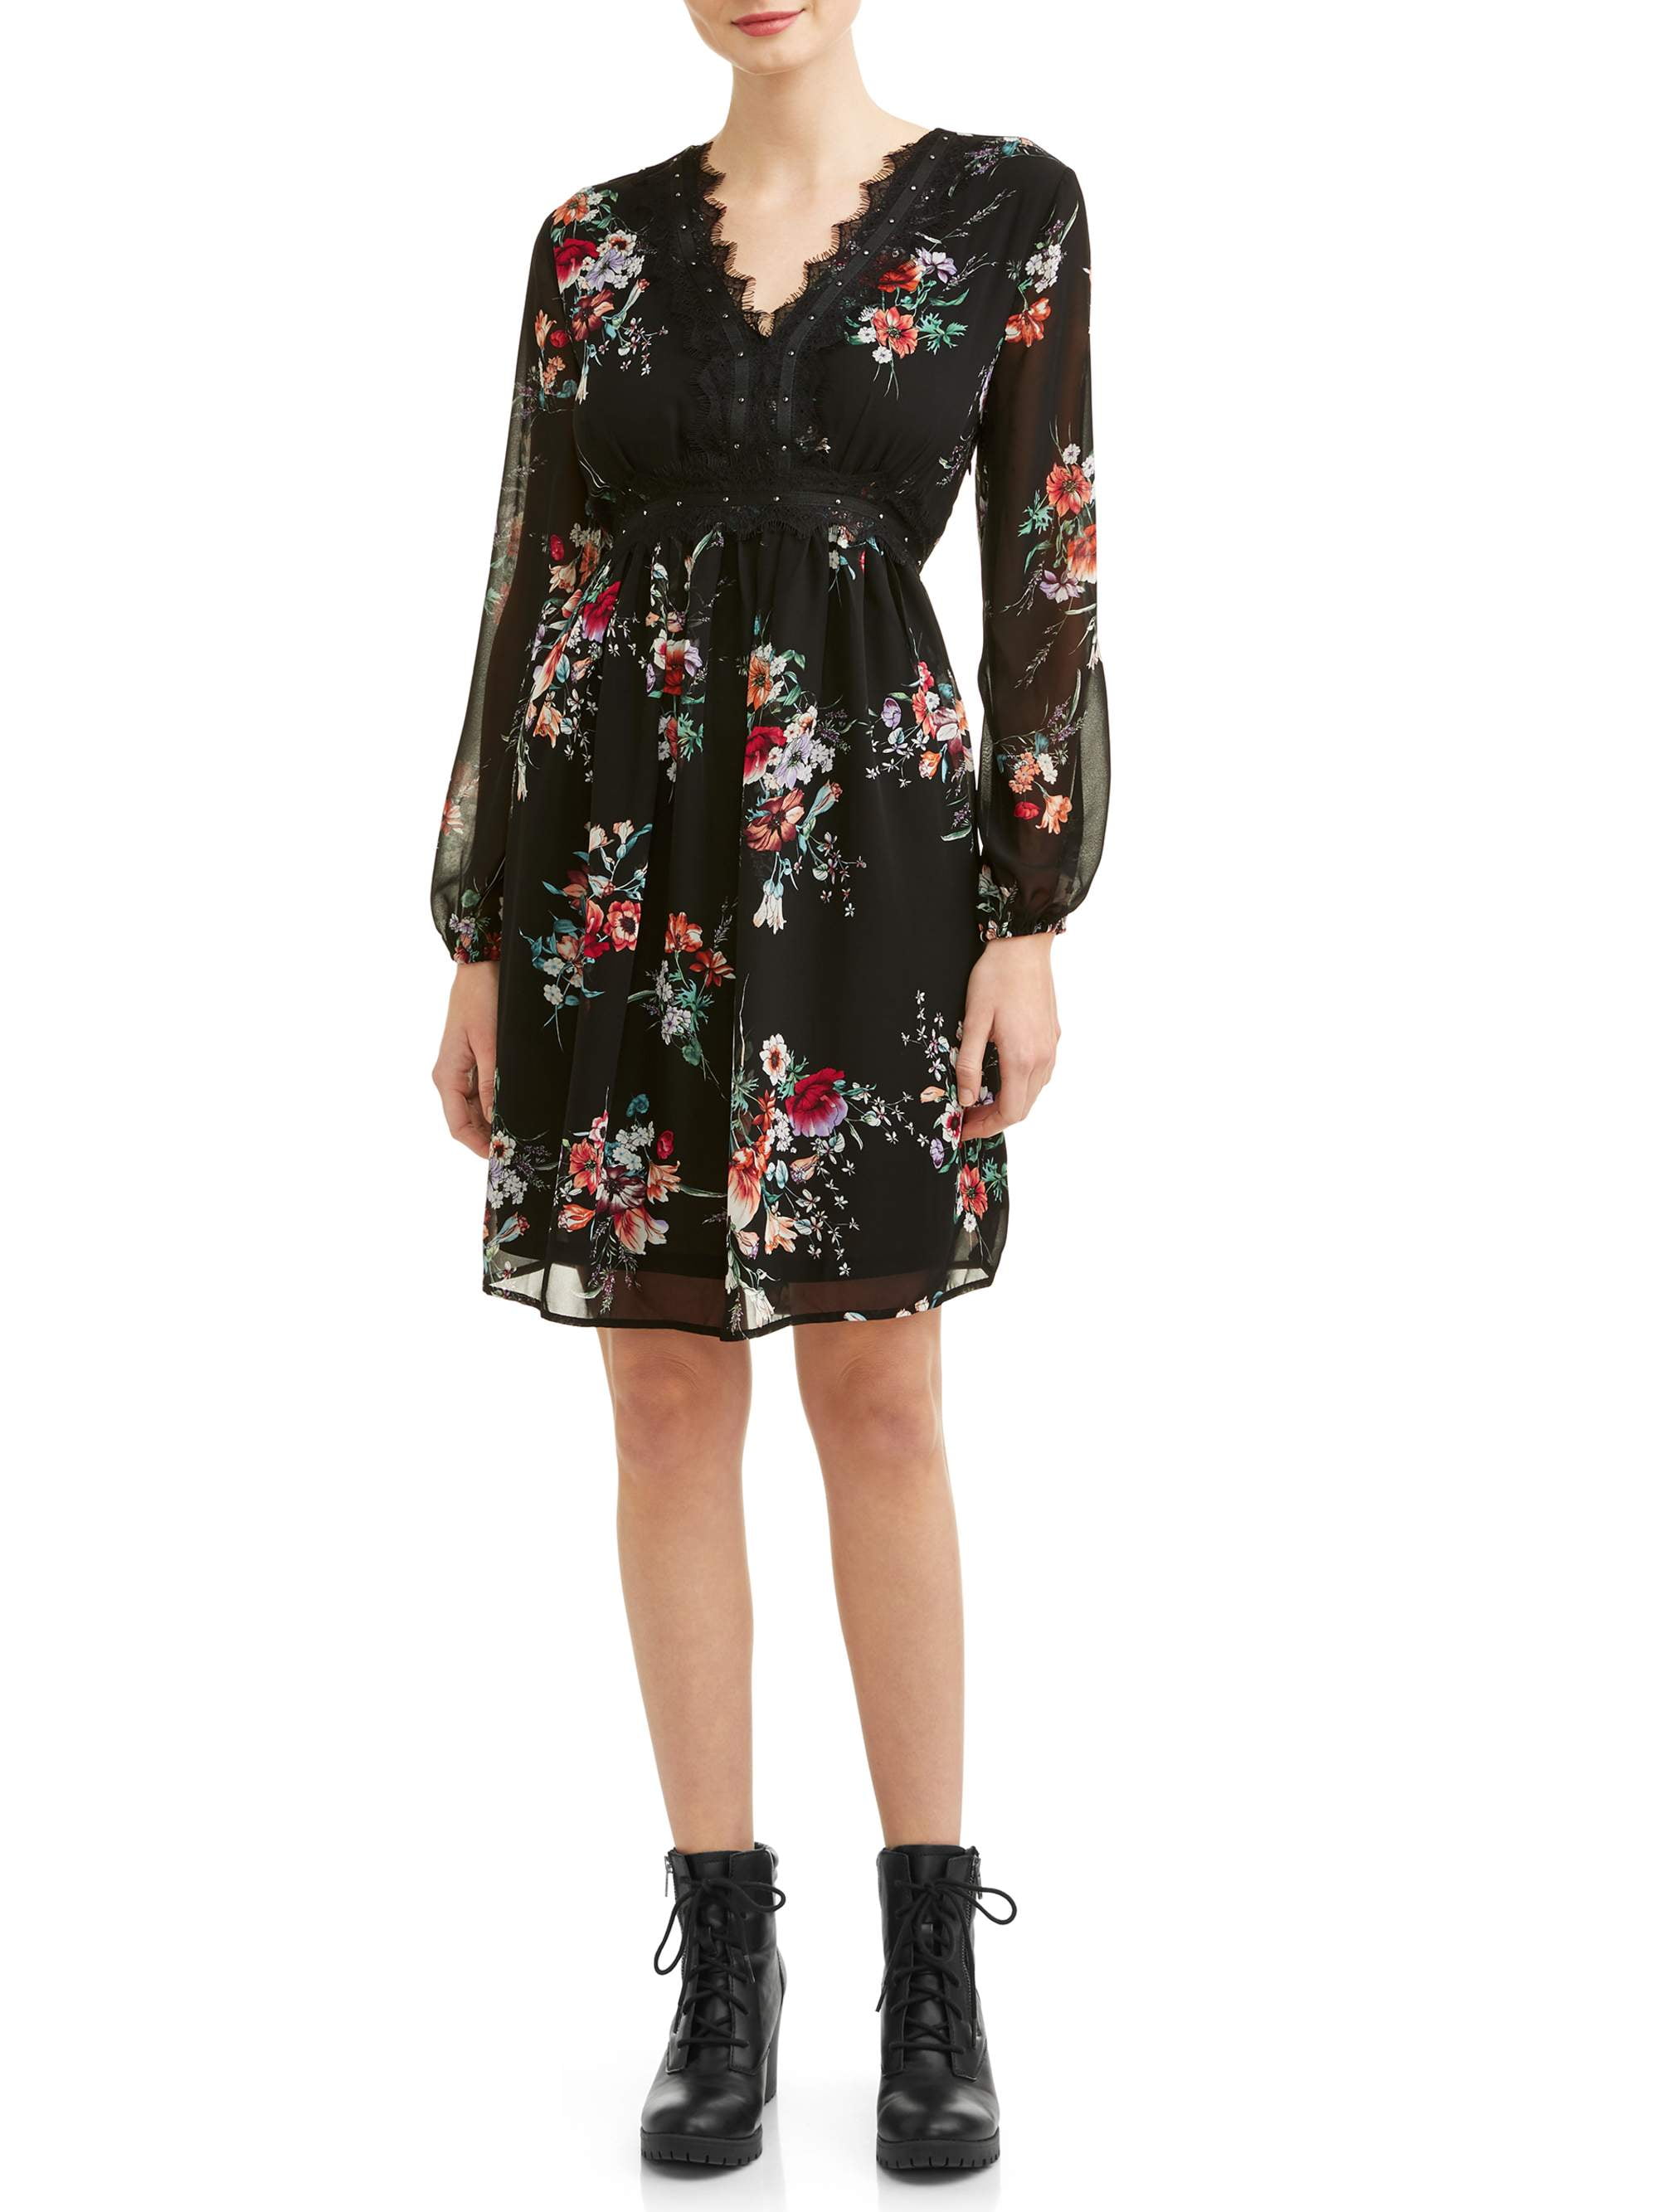 Juniors Patterned Dress with Lace Detail - Walmart.com